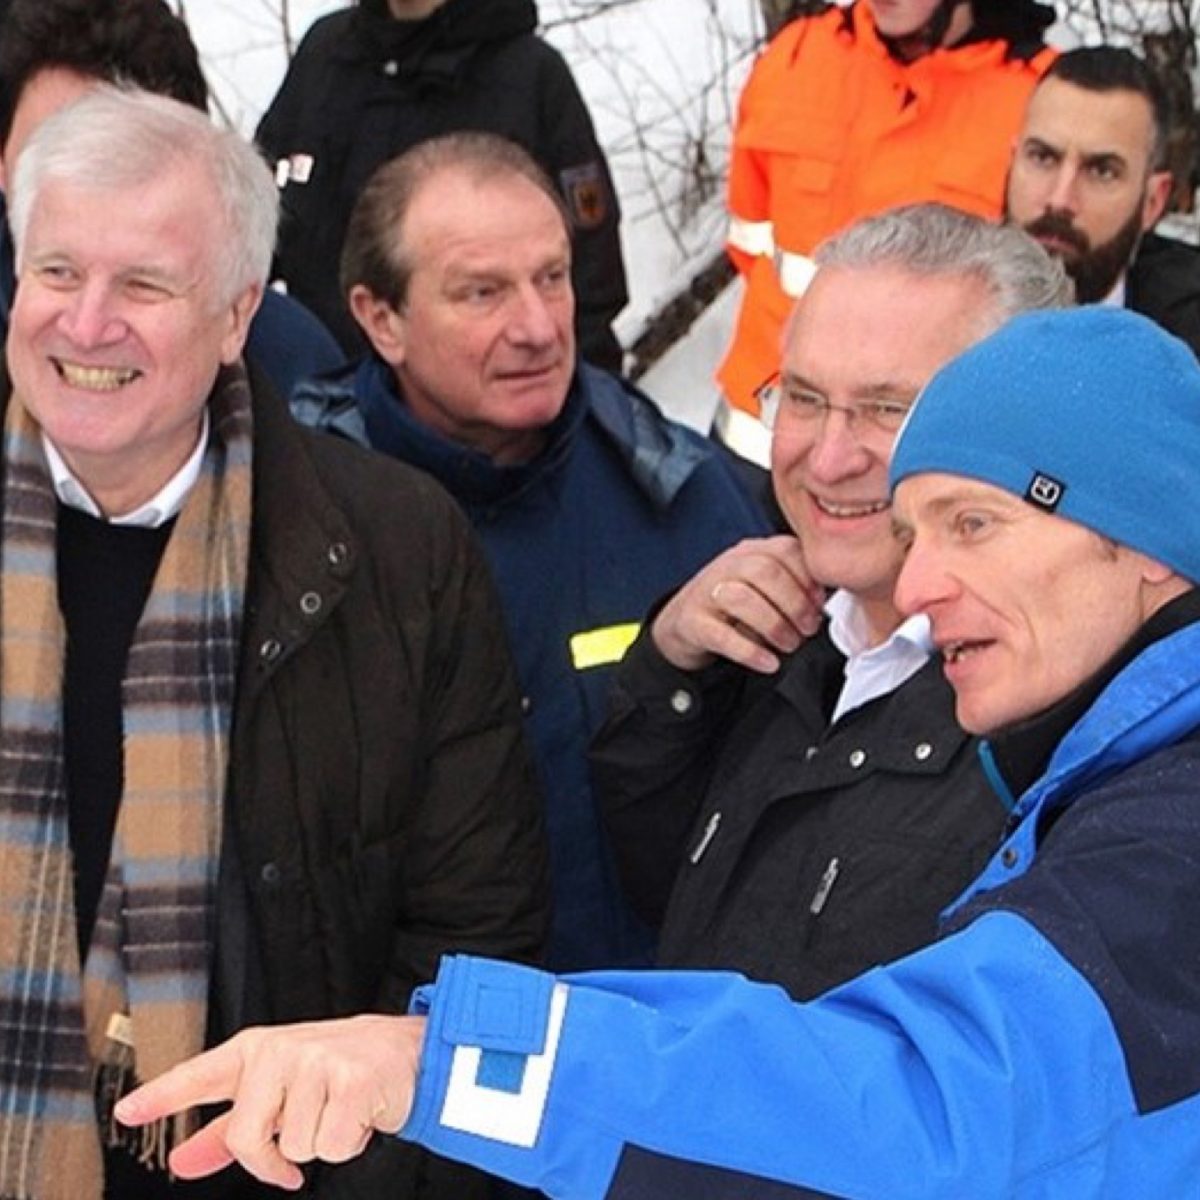 TUM Alumni and First Mayor of Berchtesgaden, Franz Rasp, with the Bavarian Minister of the Interior, Joachim Hermann, and the former Bavarian Prime Minister Horst Seehofer (from right to left).